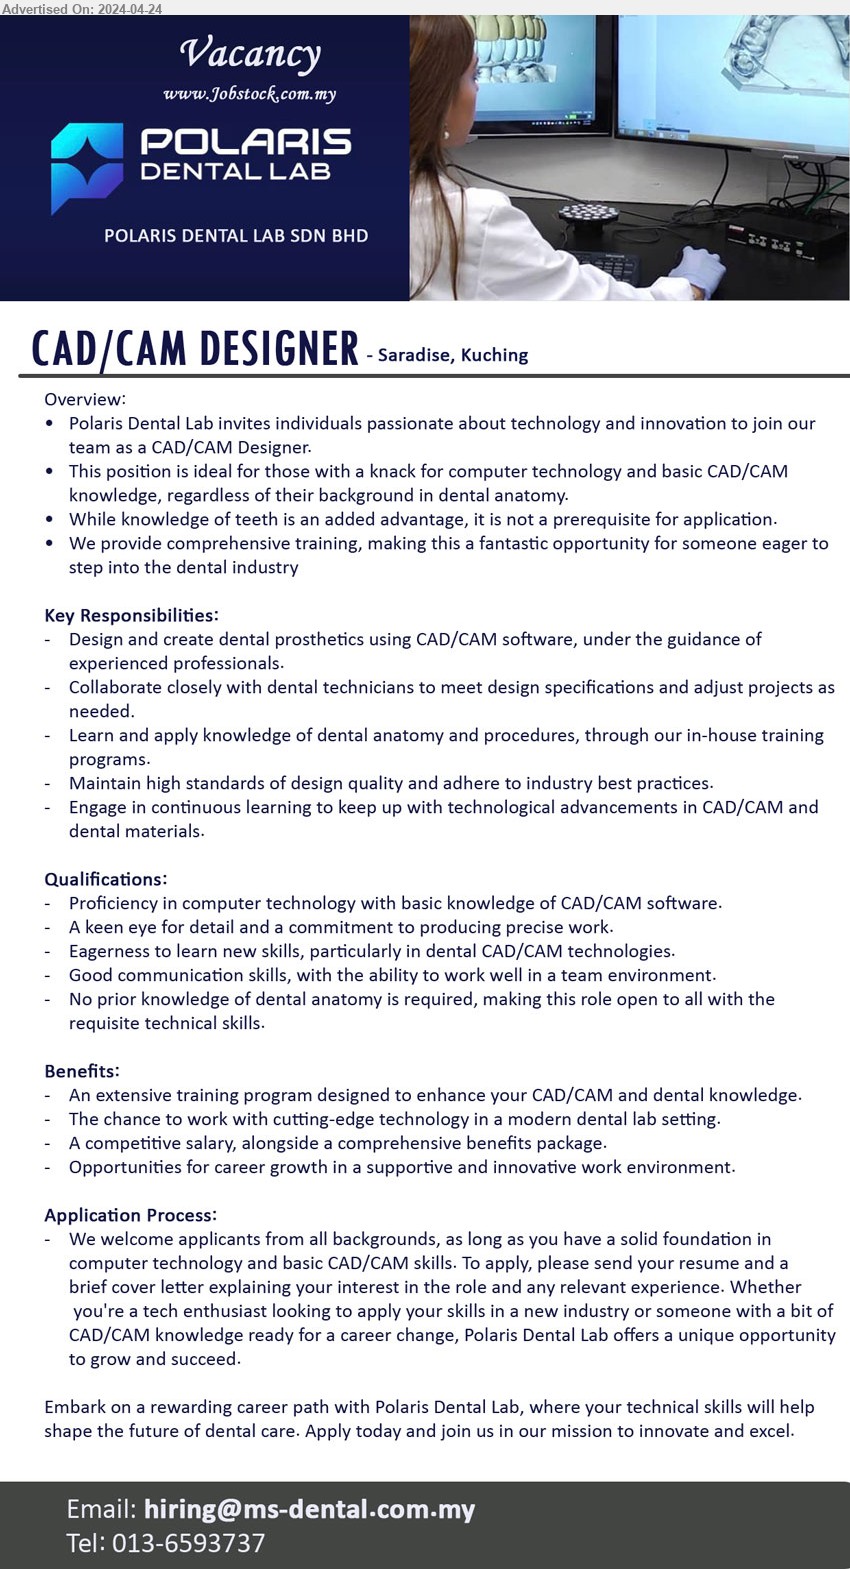 POLARIS DENTAL LAB SDN BHD - CAD/CAM DESIGNER (Kuching), Proficiency in computer technology with basic knowledge of CAD/CAM software, Eagerness to learn new skills, particularly in dental CAD/CAM technologies.,...
Contact: 013-6593737